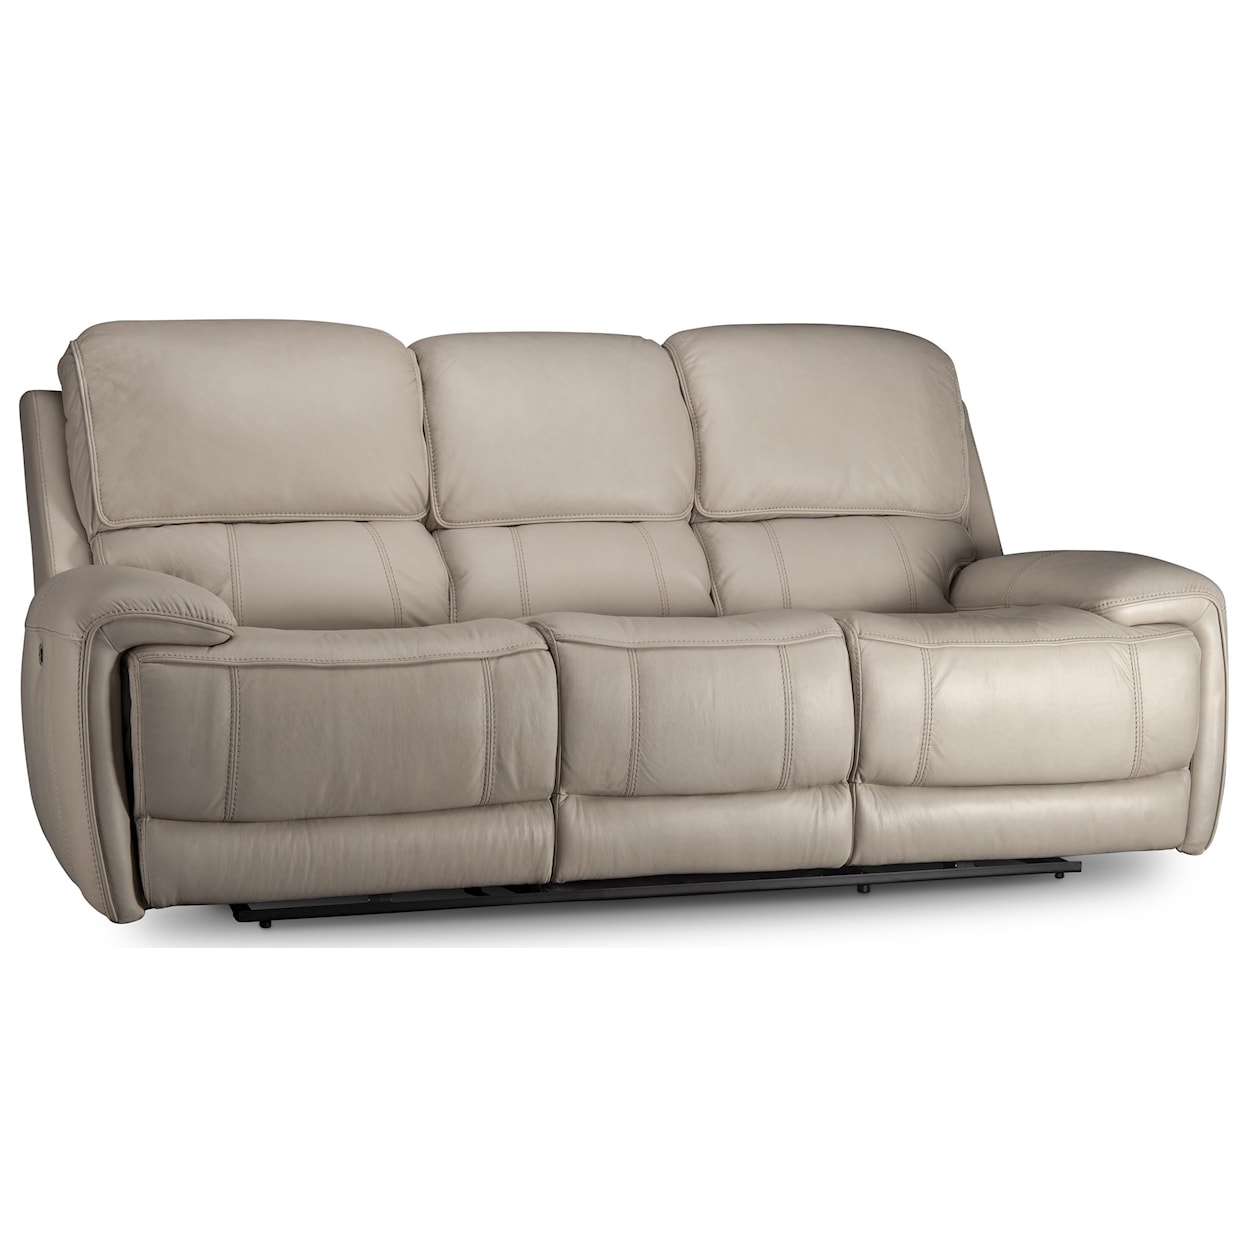 Parker House Ember Ember Power Leather Match Sofa